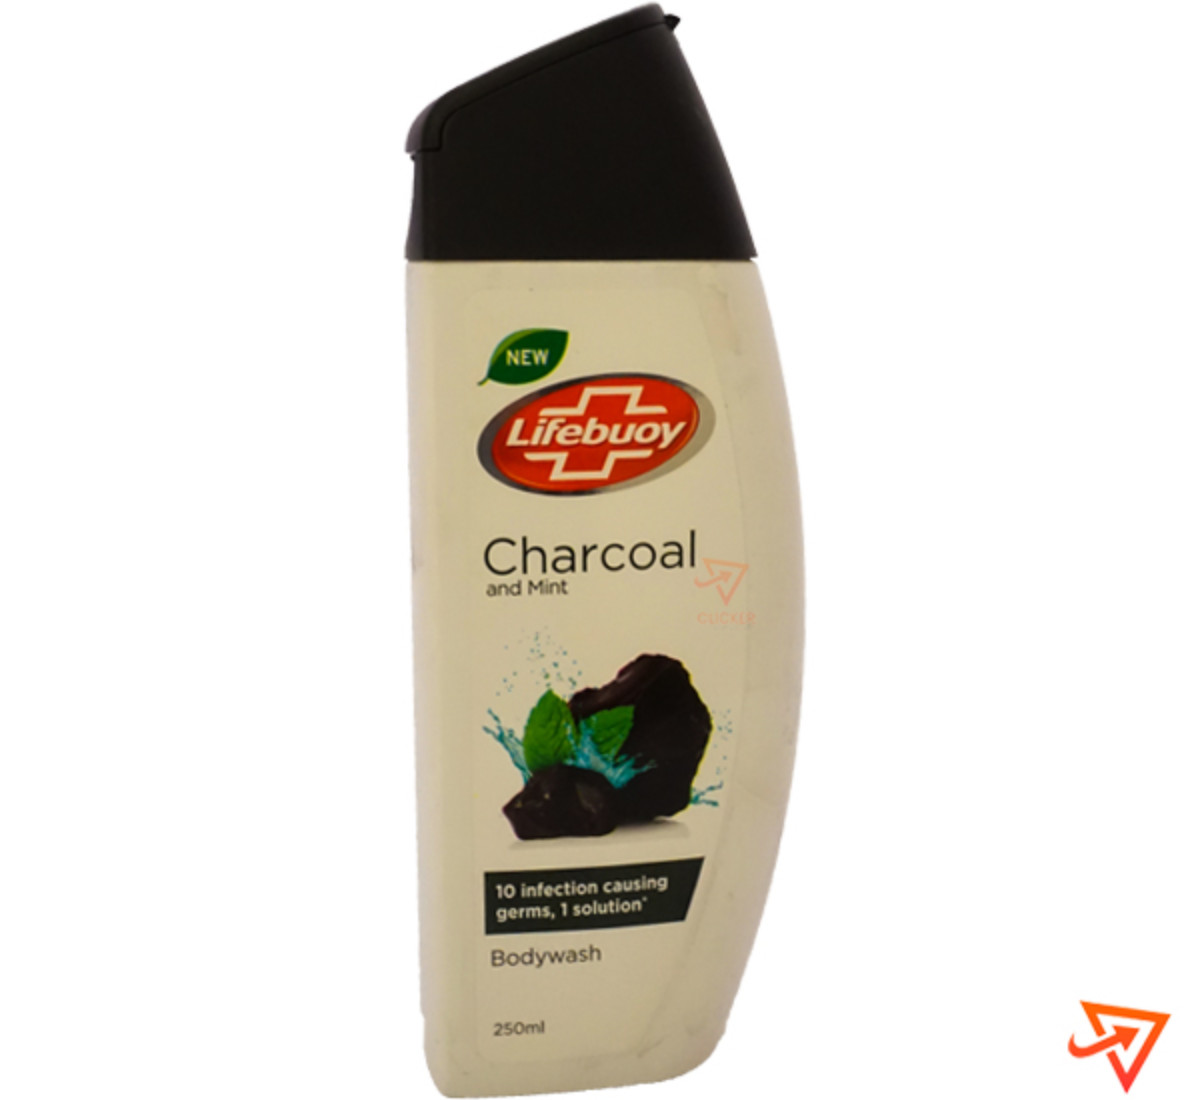 Clicker product 250ml LIFEBUOY charcoal and mint body wash 1043